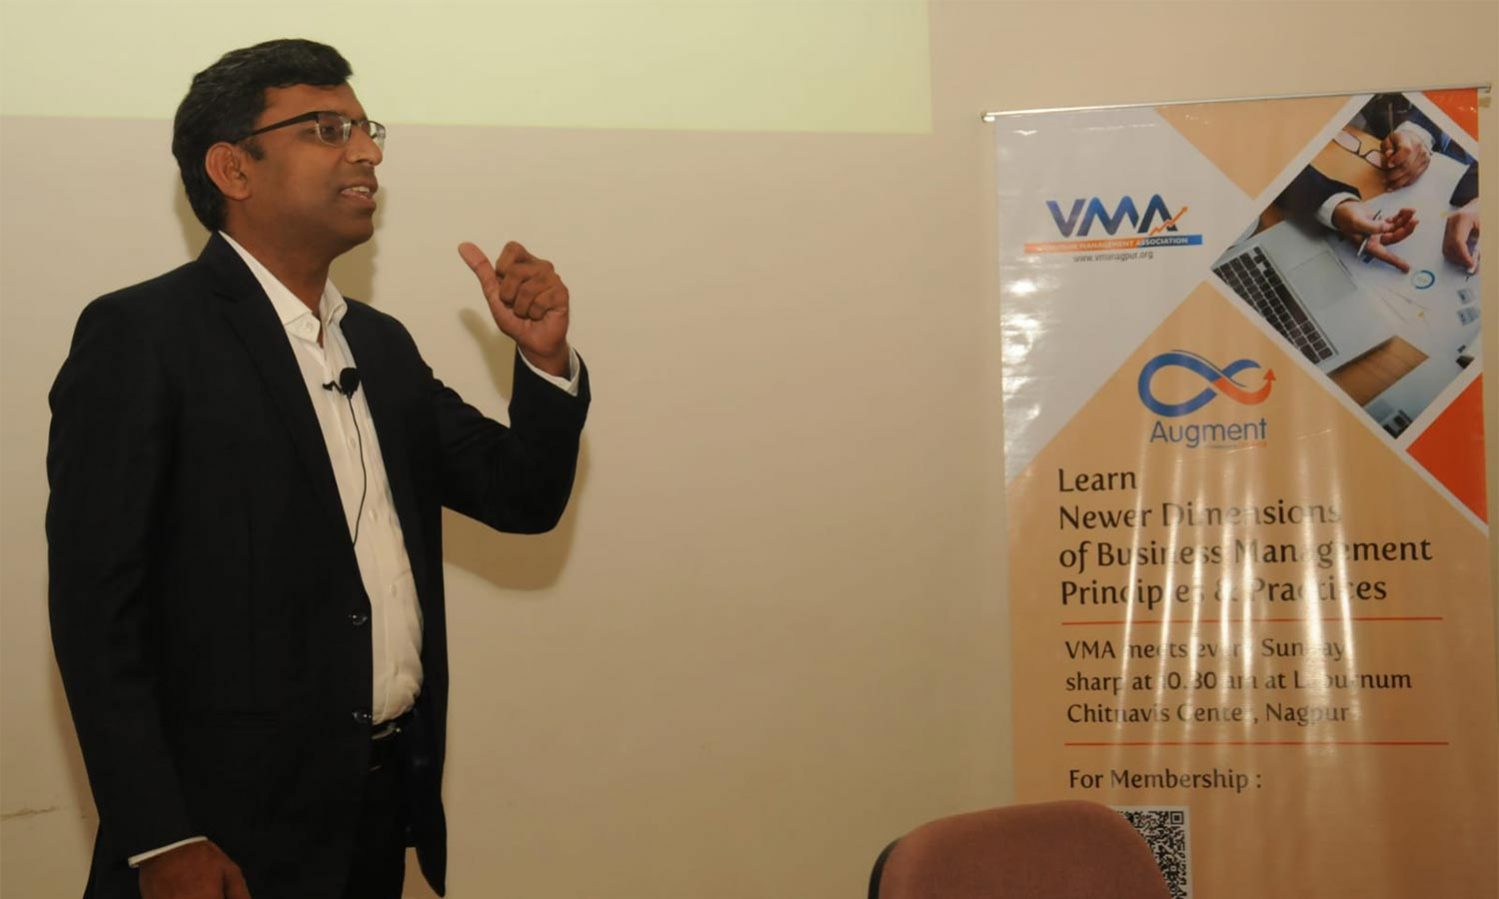 SUNDAY LECTURE AT THE VIDARBHA MANAGEMENT ASSOCIATION (VMA) ON THE 7 SPENDING SECRETS OF HAPPY BALANCE SHEET